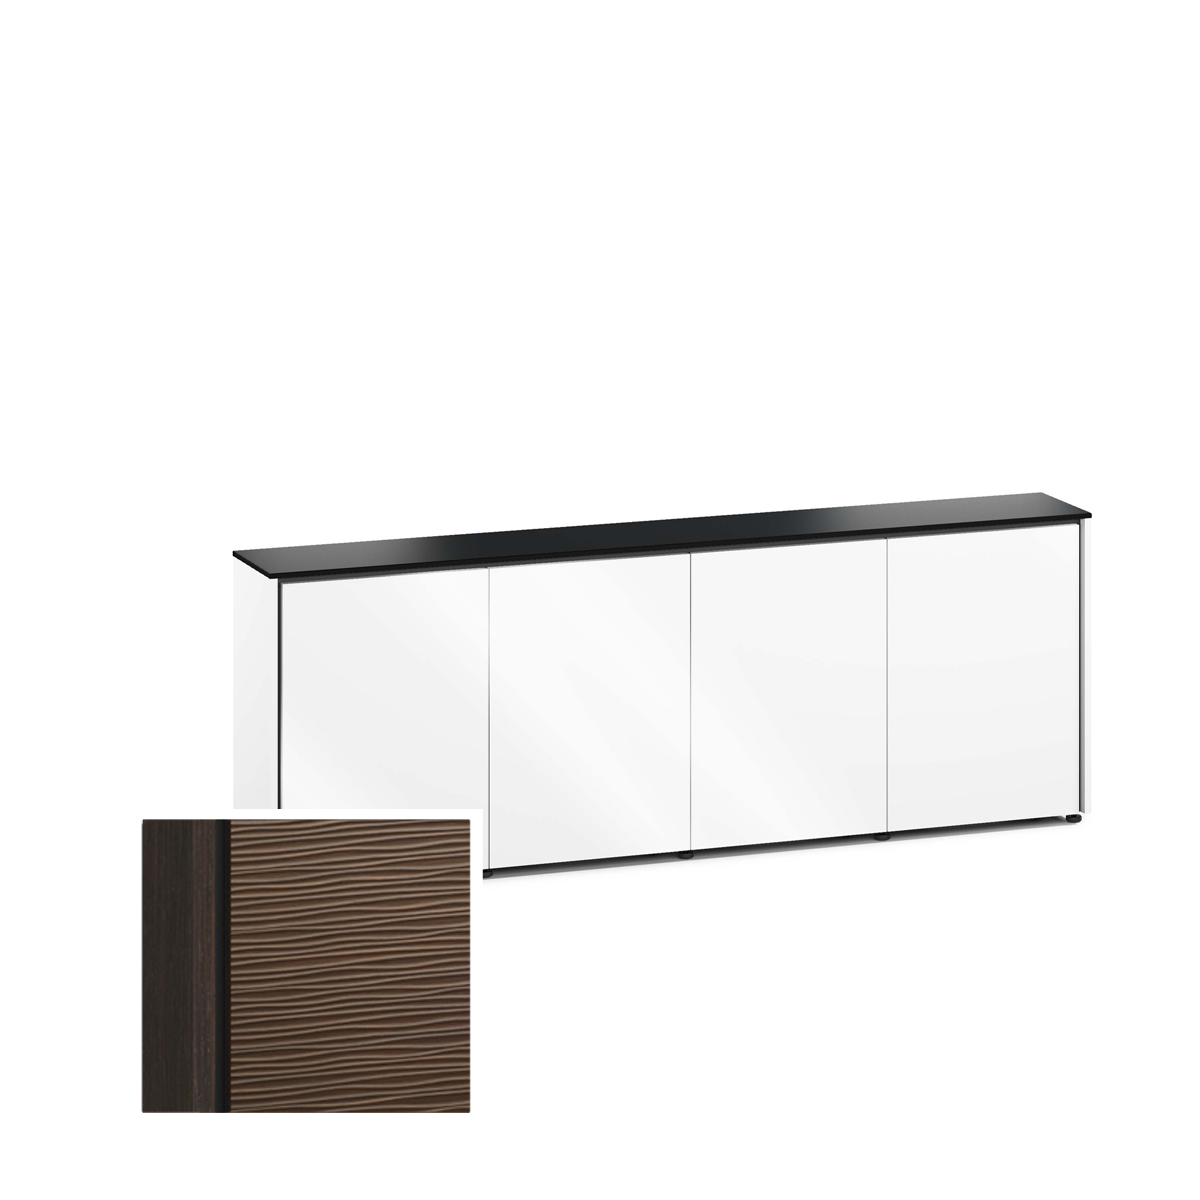 D1/347A/BL/WE 4 Bay Low-Profile, Wall Cabinet, Berlin/Wave Texture- Wenge